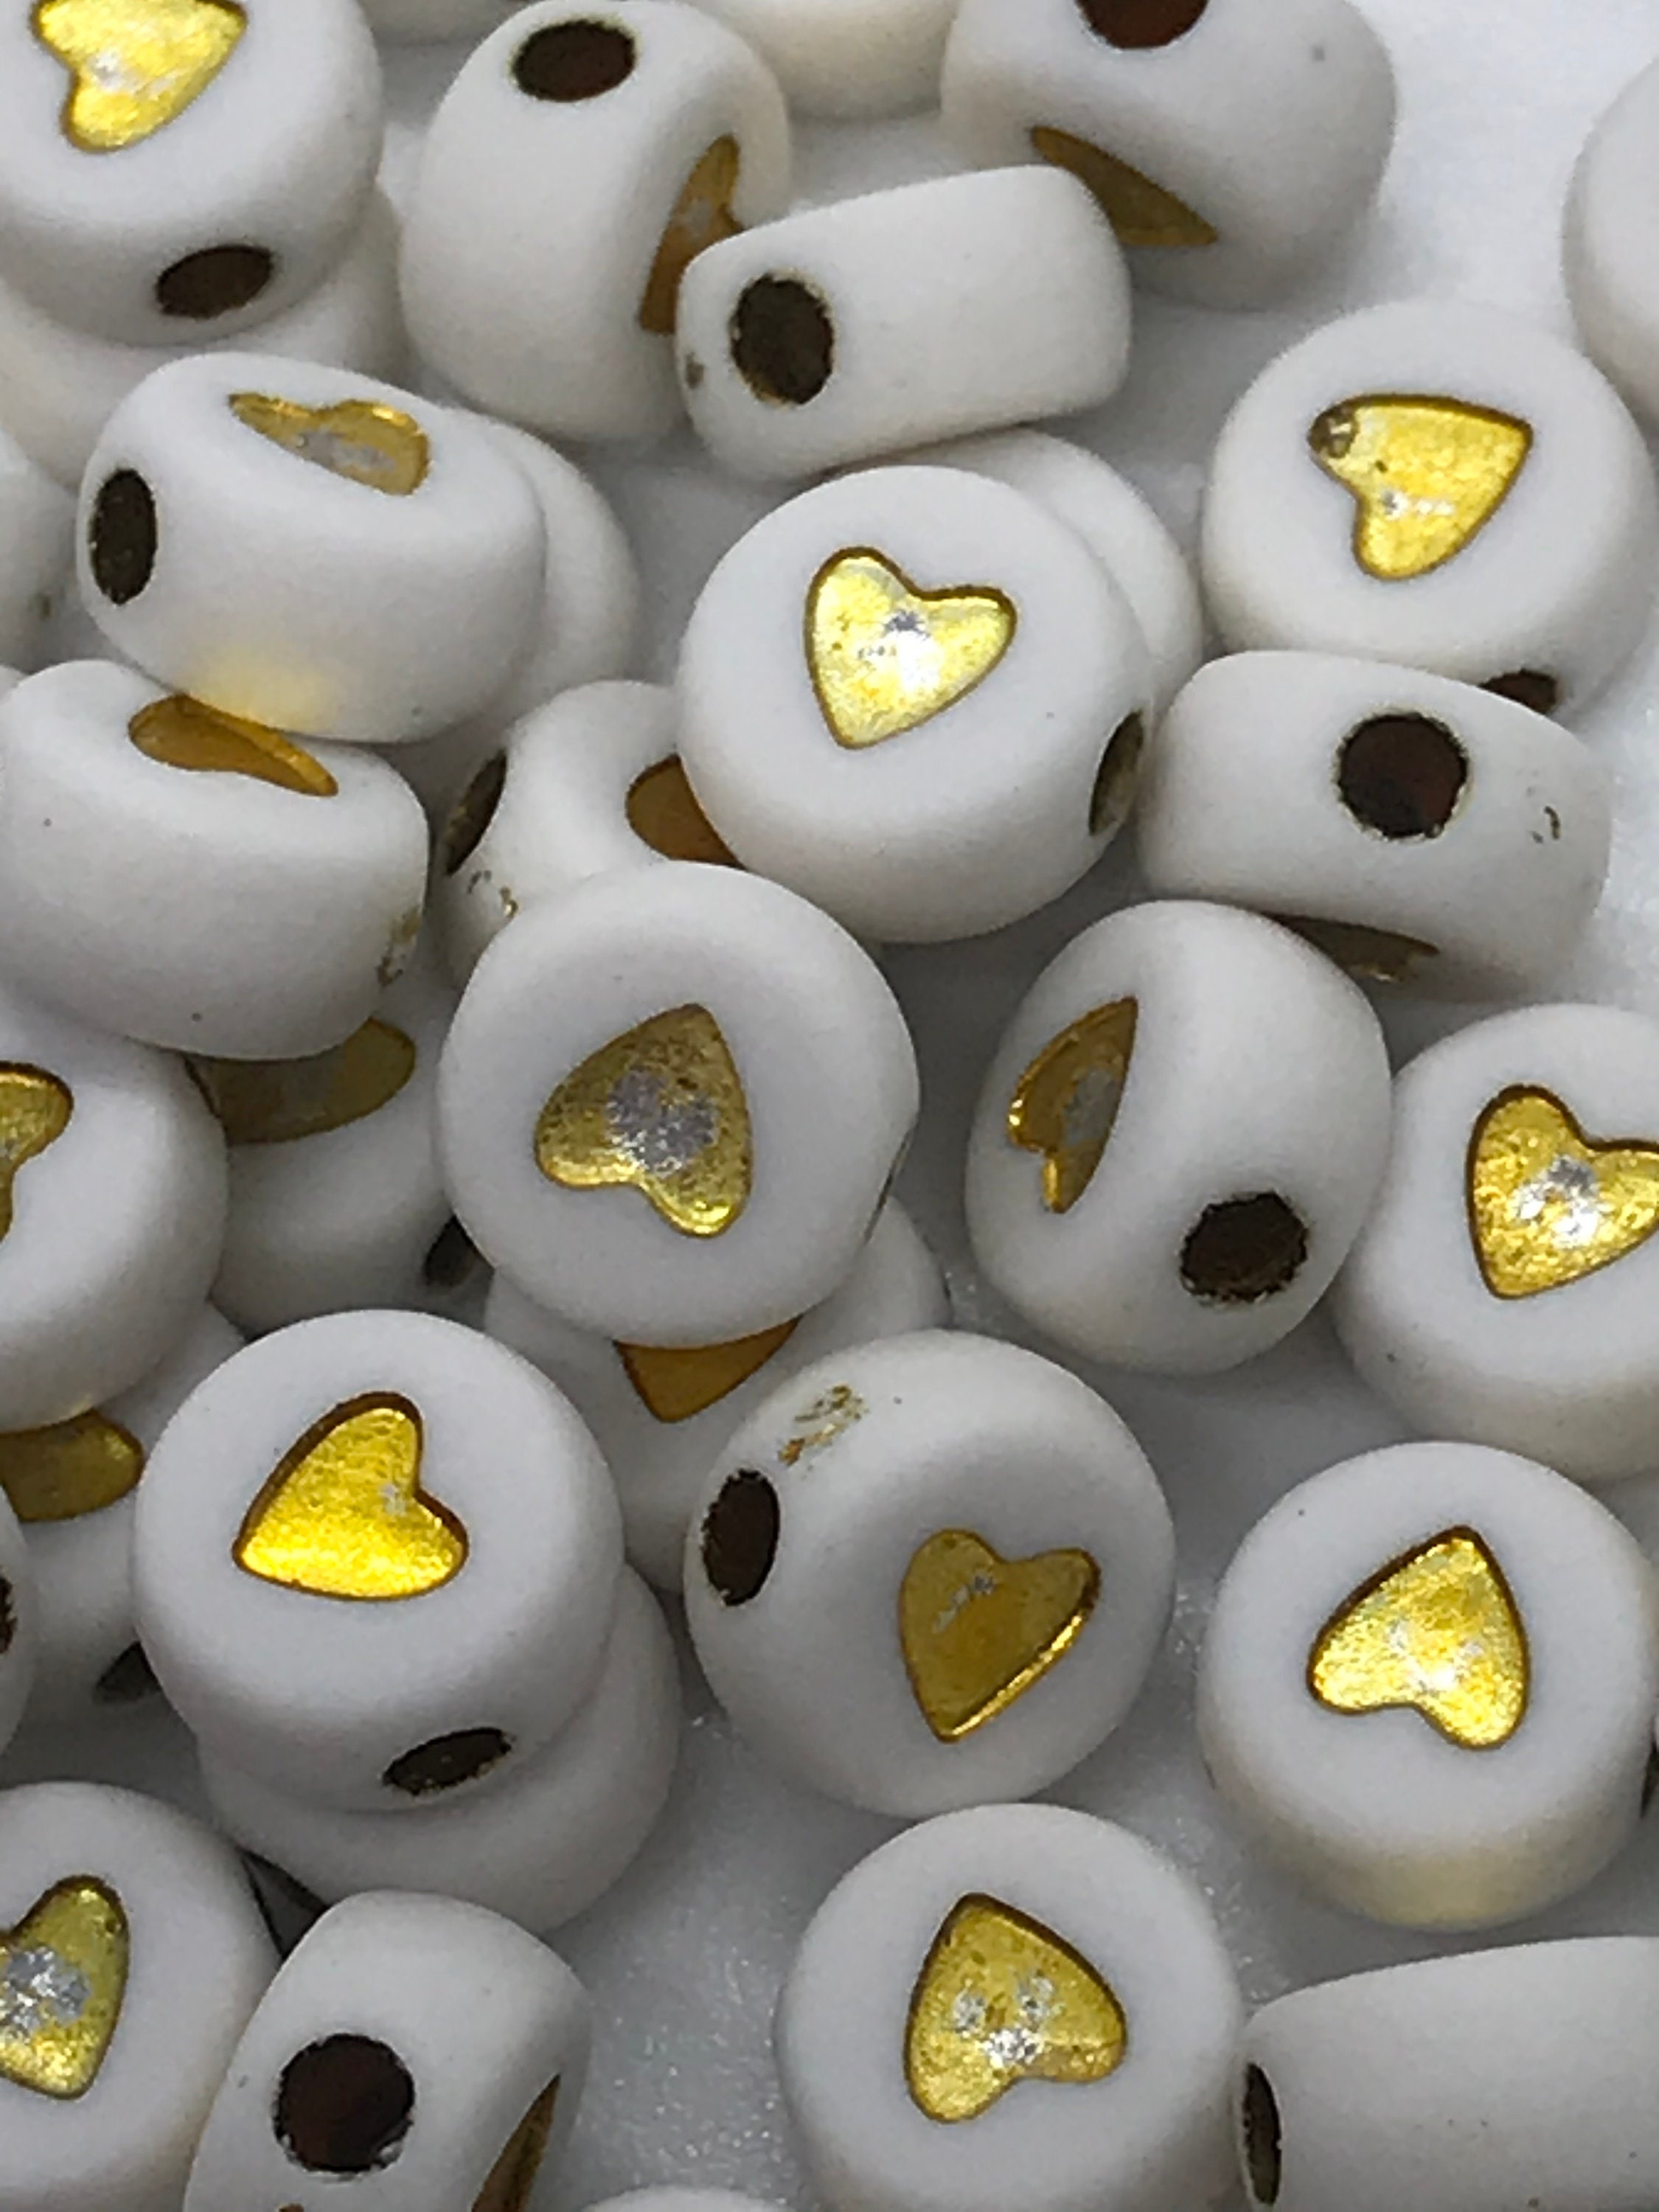 Vermeil Gold or Sterling Silver Heart Beads - Gold Flat Heart Beads Go –  HarperCrown